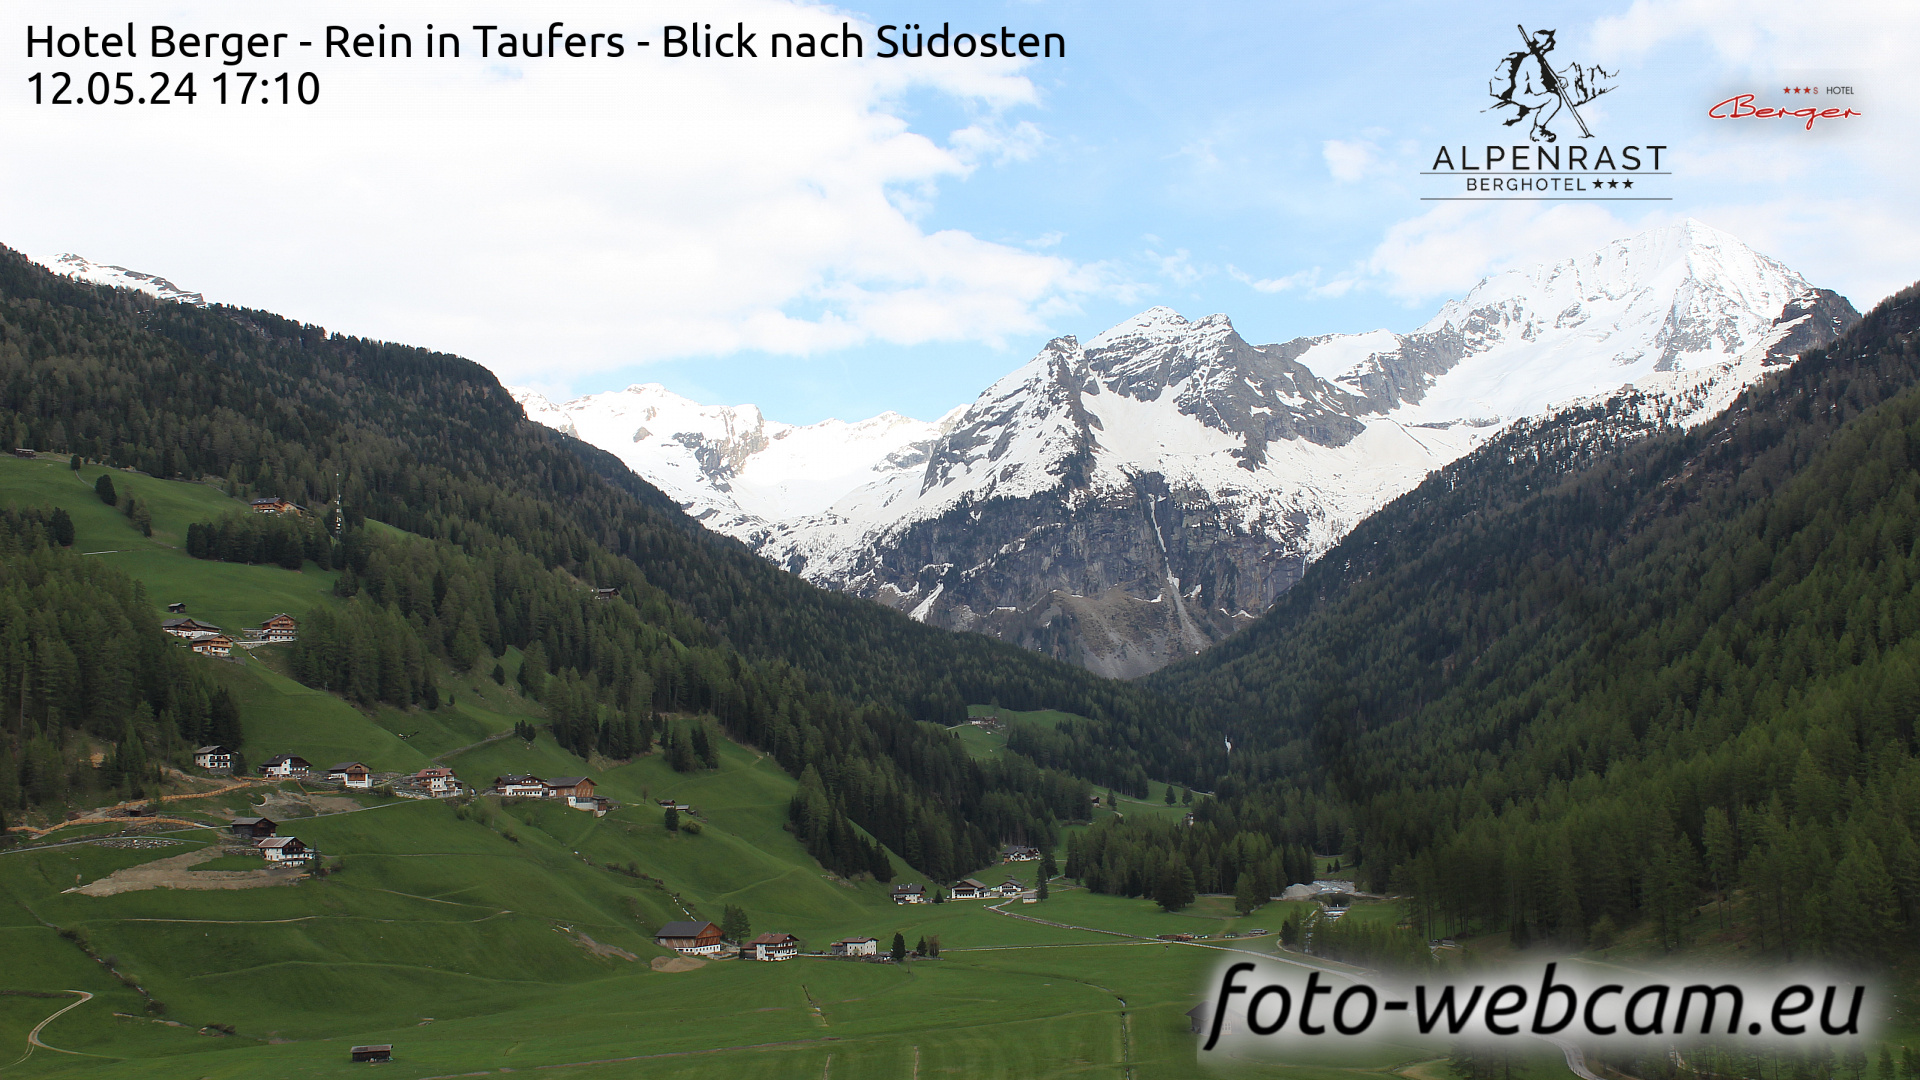 Rein in Taufers Do. 17:11